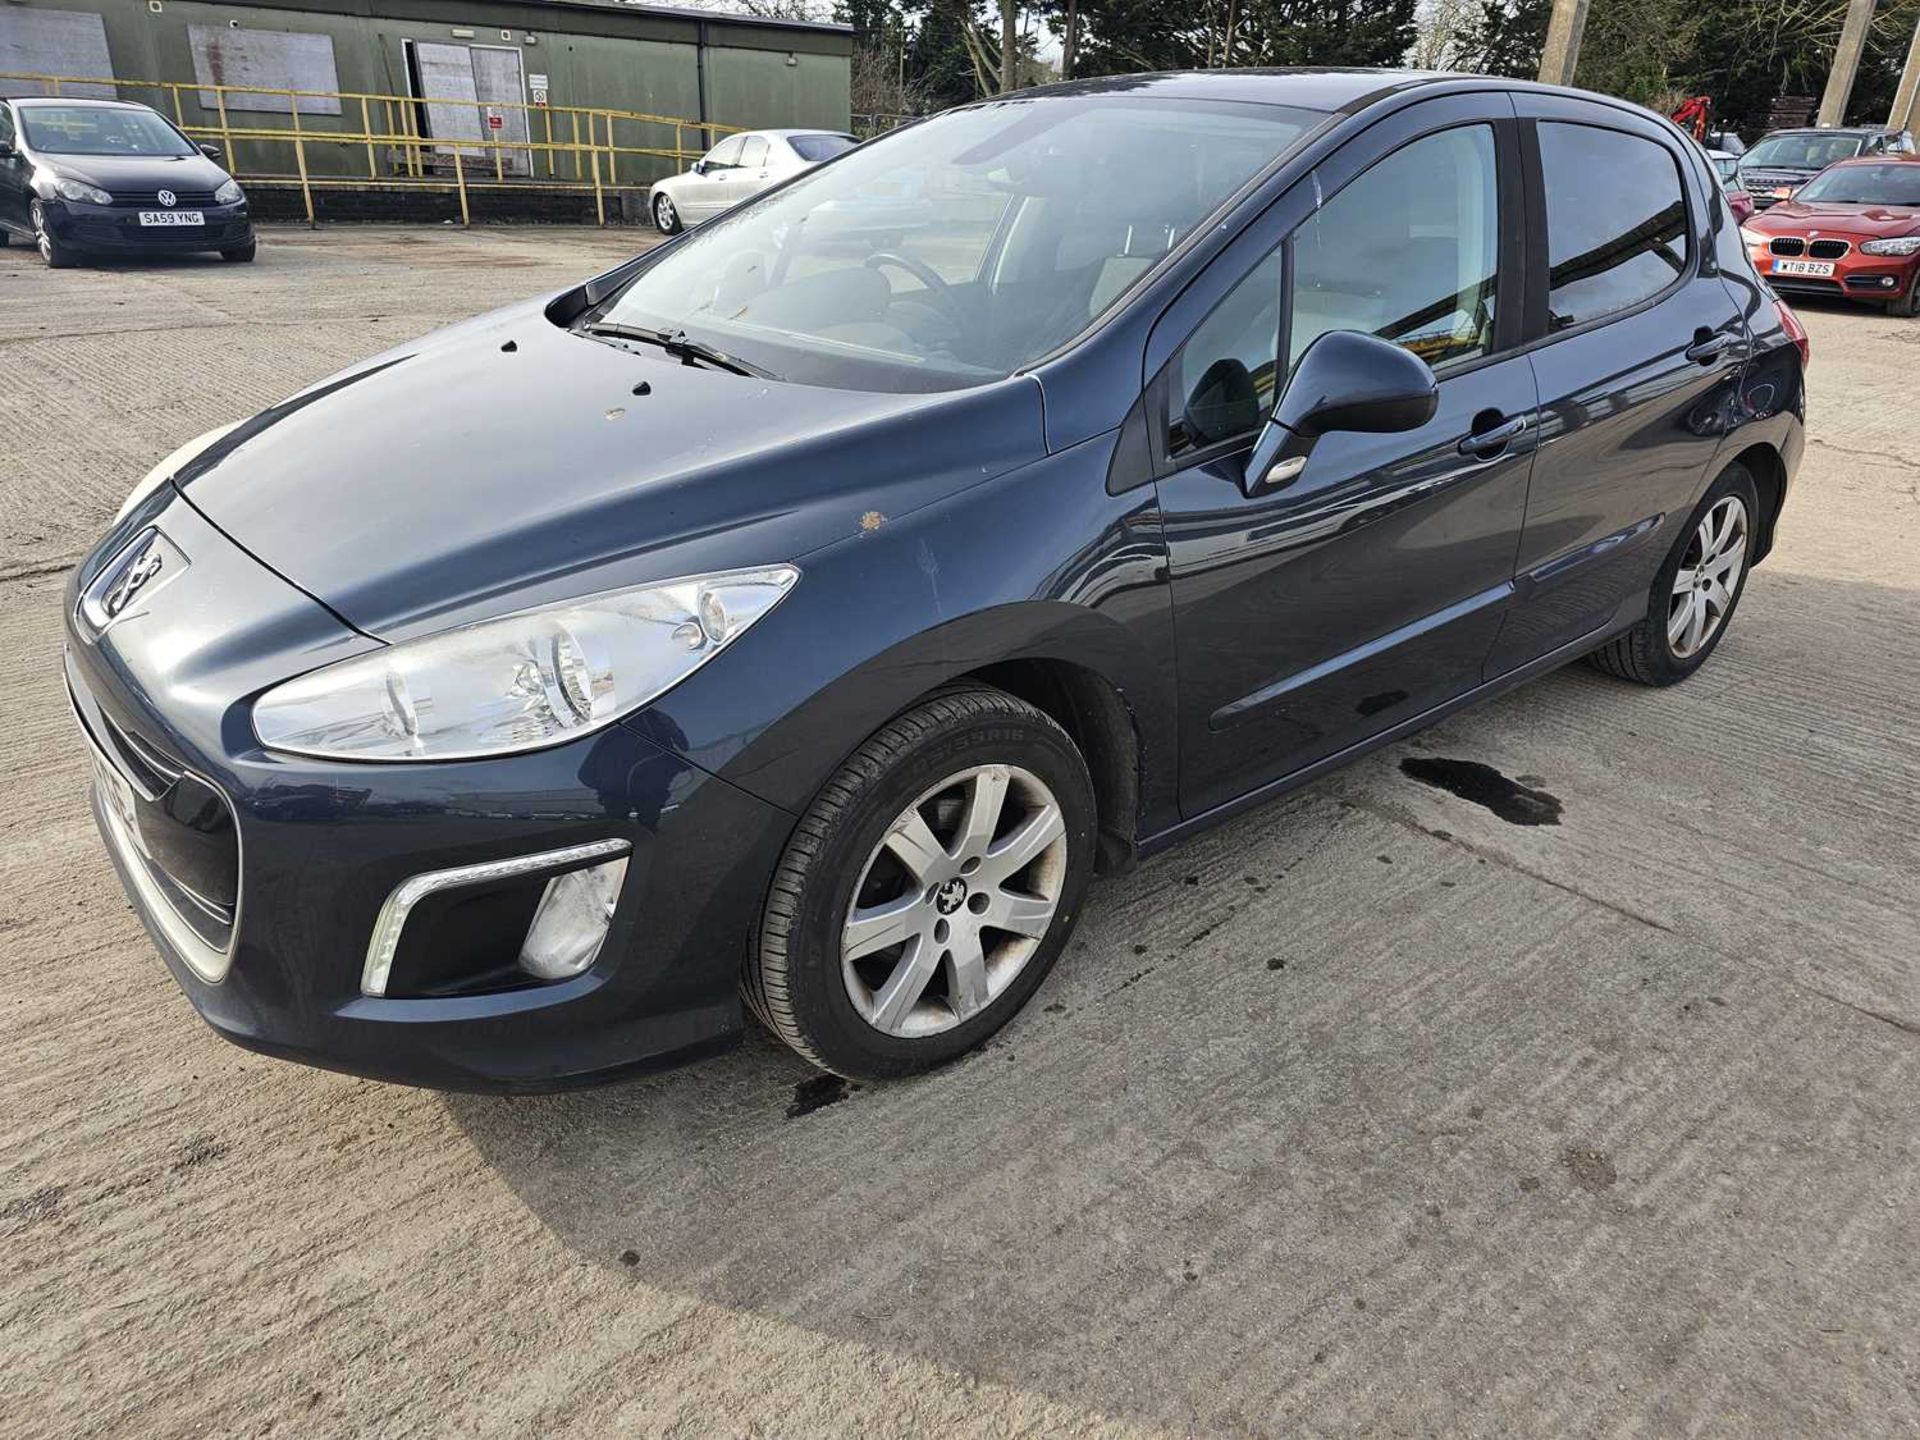 2012 Peugeot 308, 5 Speed, Bluetooth, Cruise Control, A/C (Reg. Docs. Available, Tested 09/24)